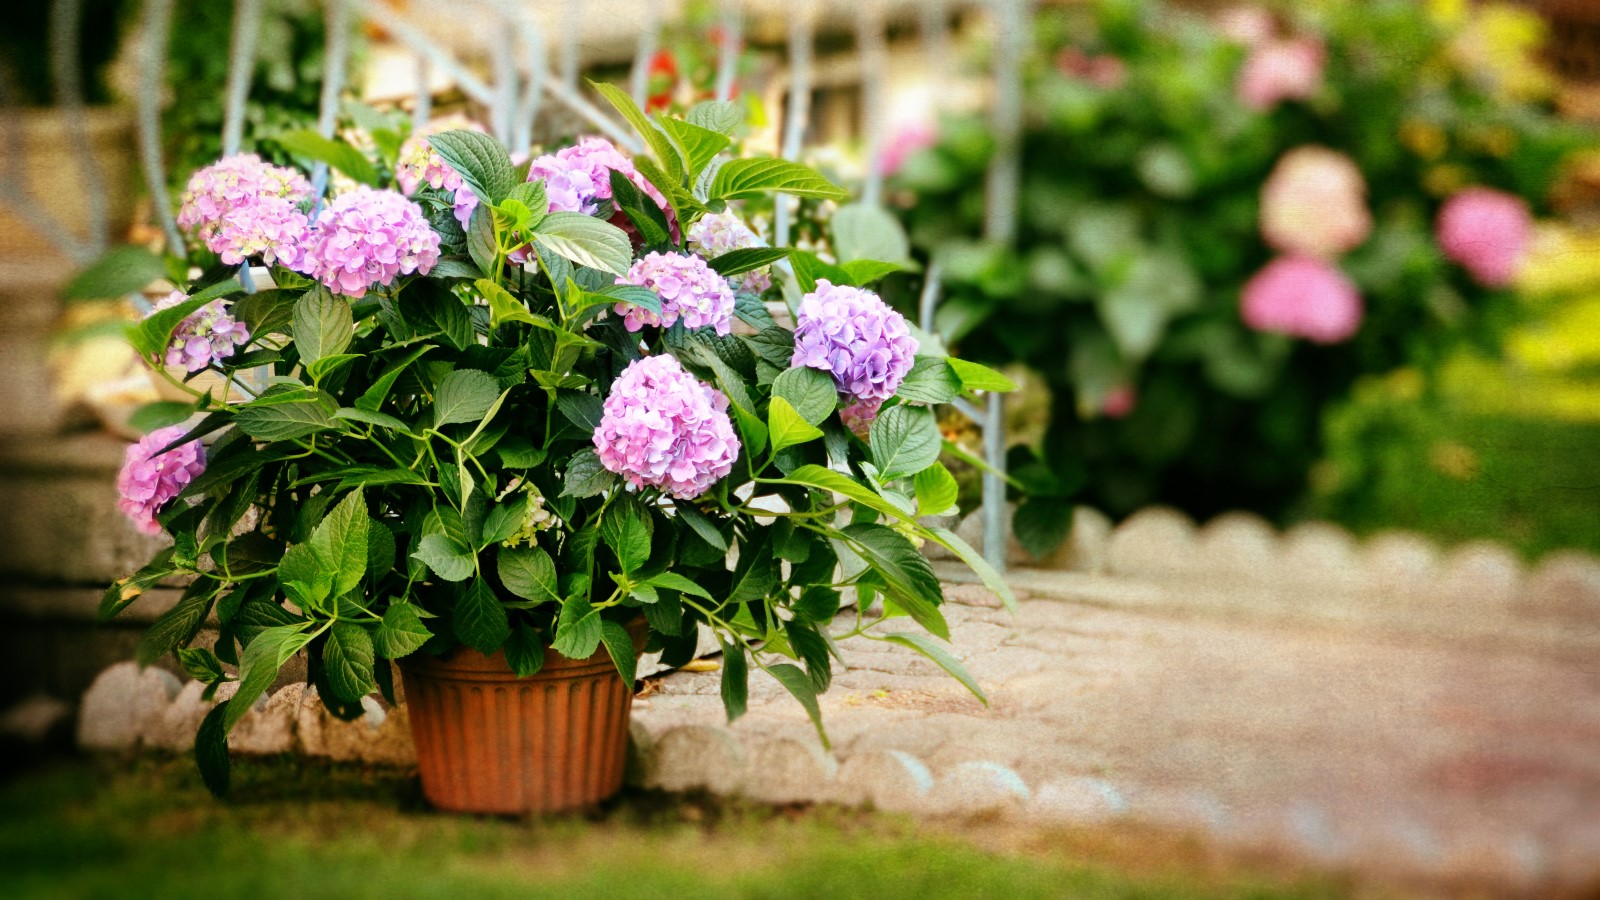 Image of Hydrangea ericaceous in pot